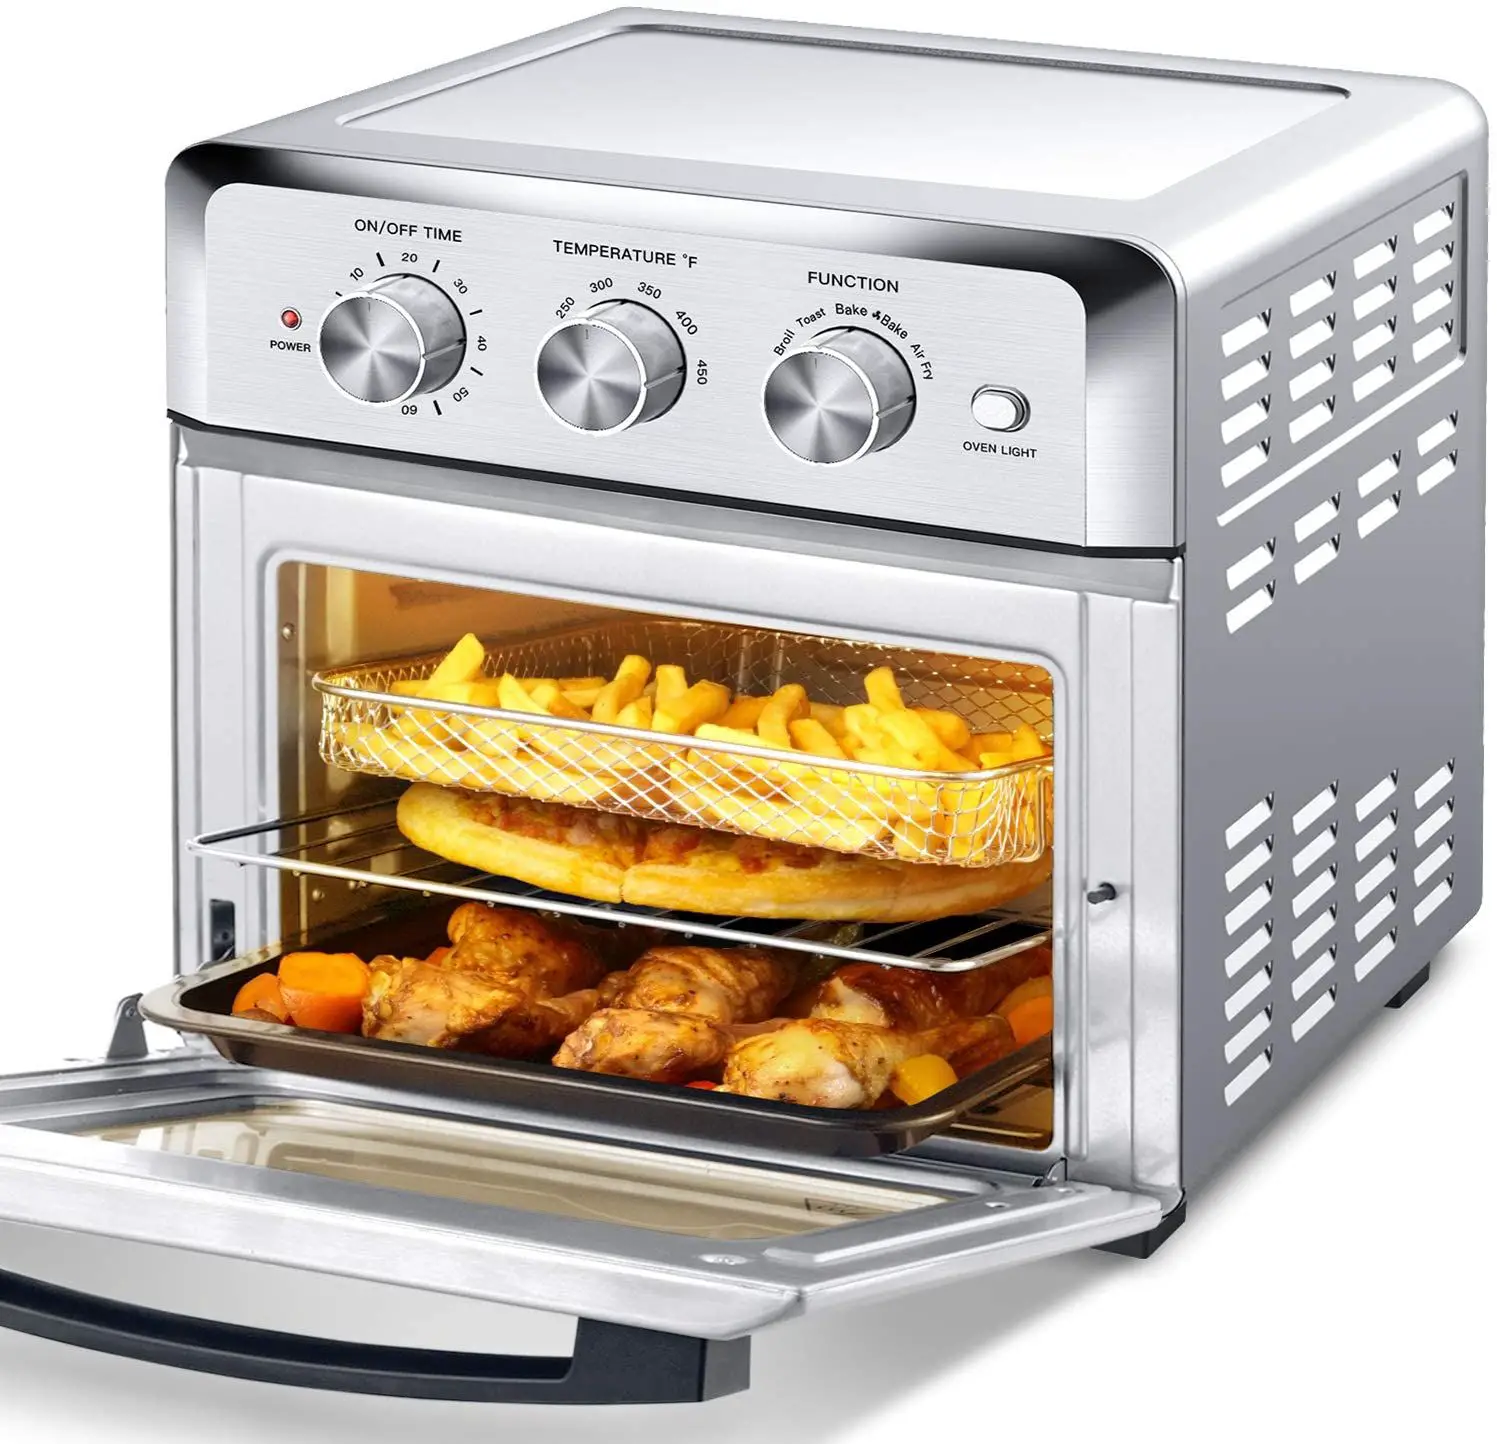 Geek Chef Air Fryer Toaster Oven, 4 Slice 19 Quart Convection Airfryer ...